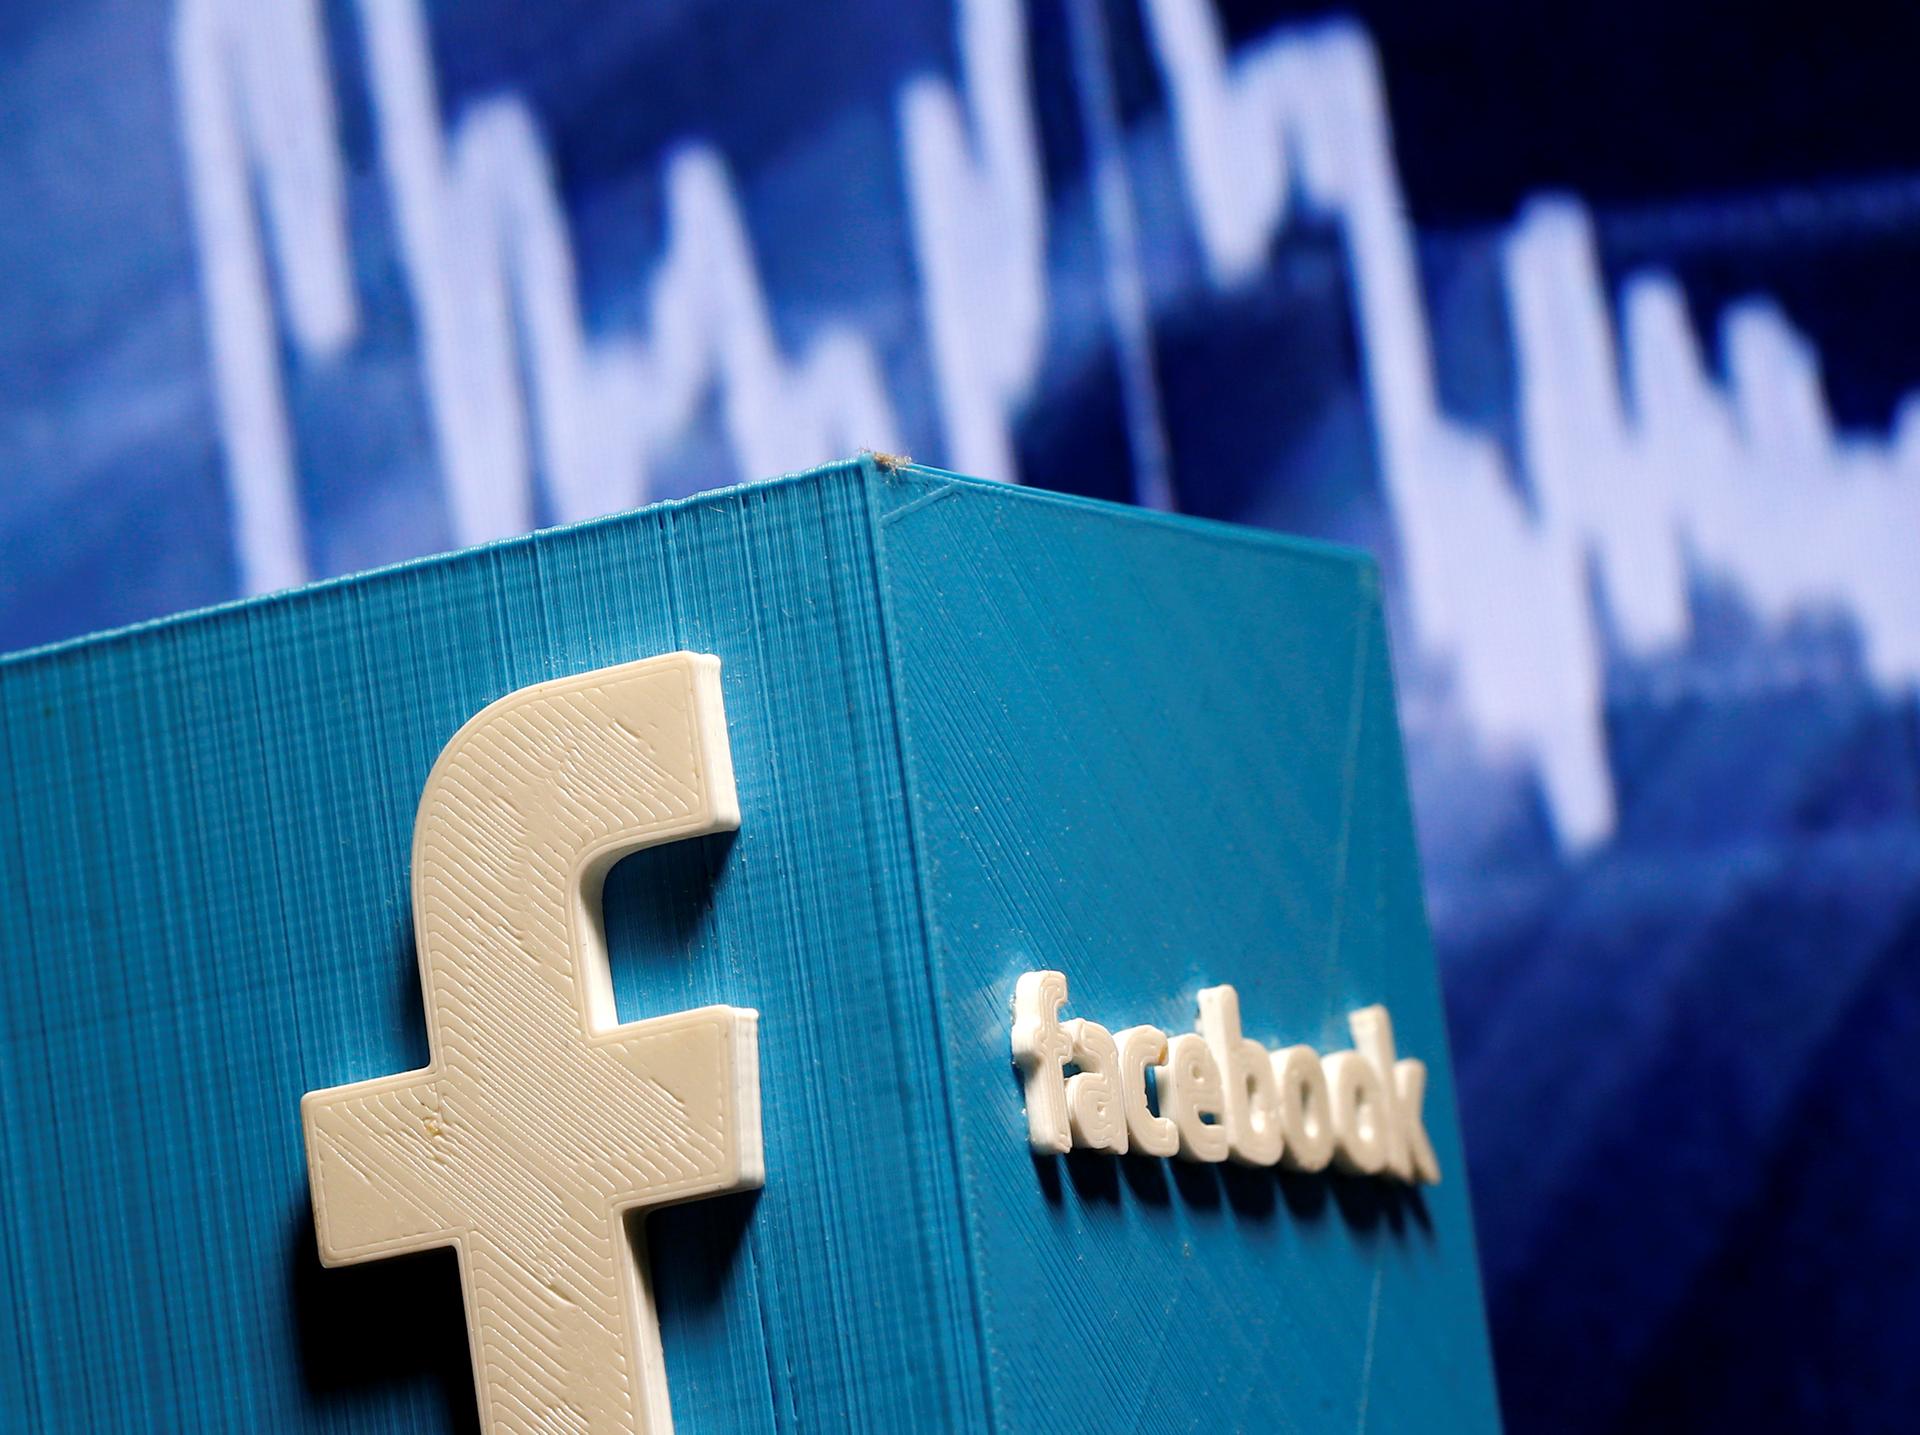 UNC professor Zeynep Tufekci says Facebook is offering the news equivalent of Halloween candy.